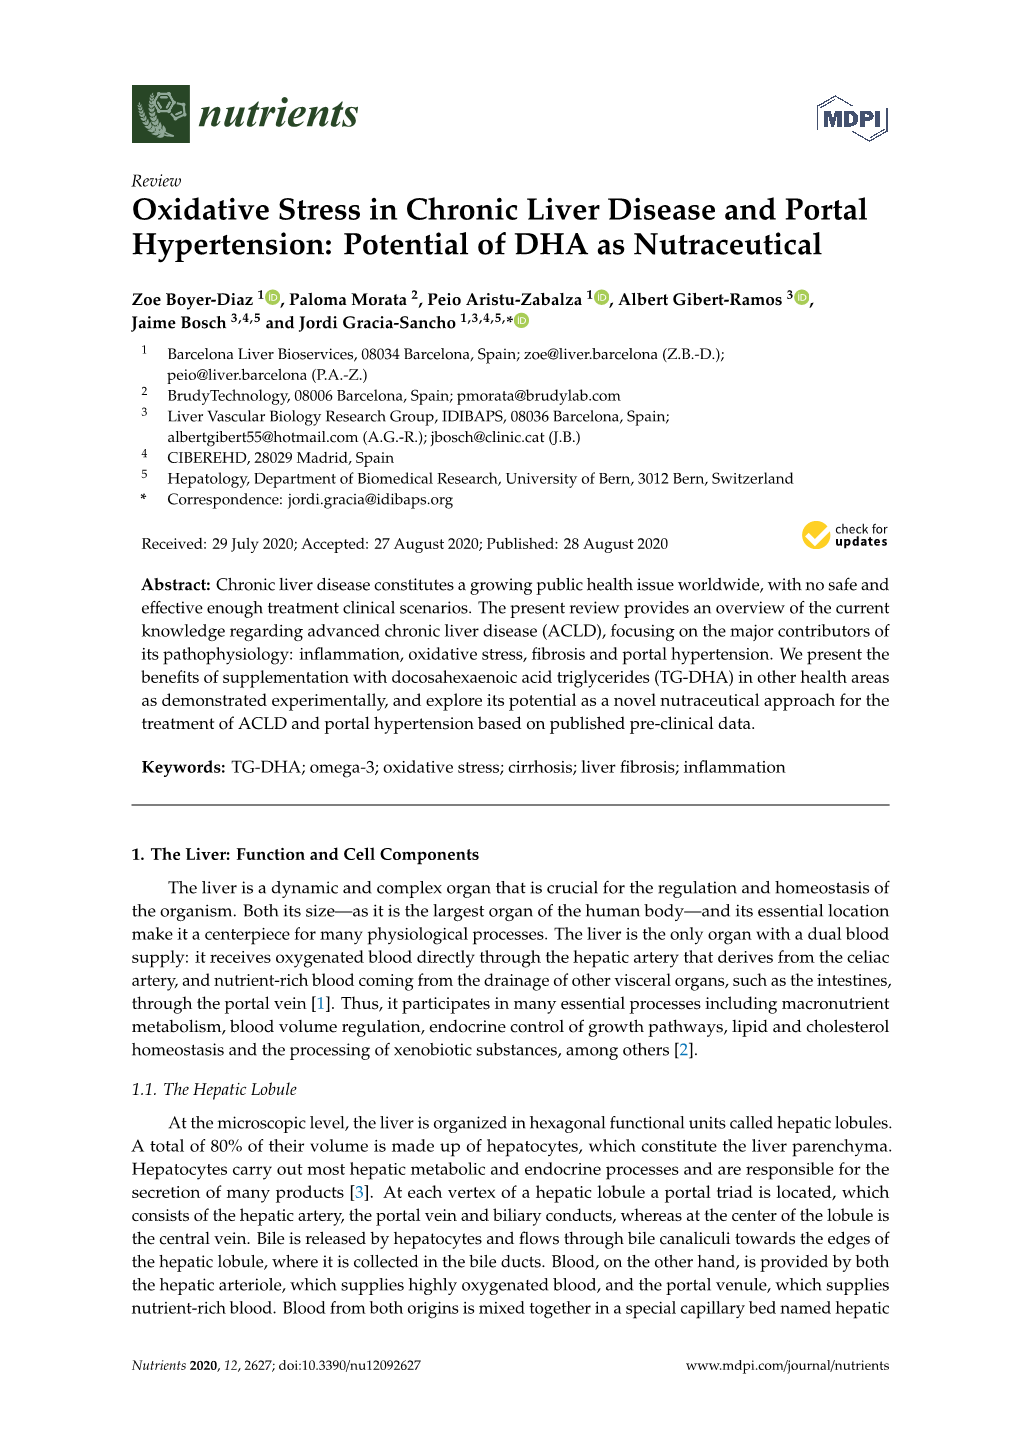 Oxidative Stress in Chronic Liver Disease and Portal Hypertension: Potential of DHA As Nutraceutical